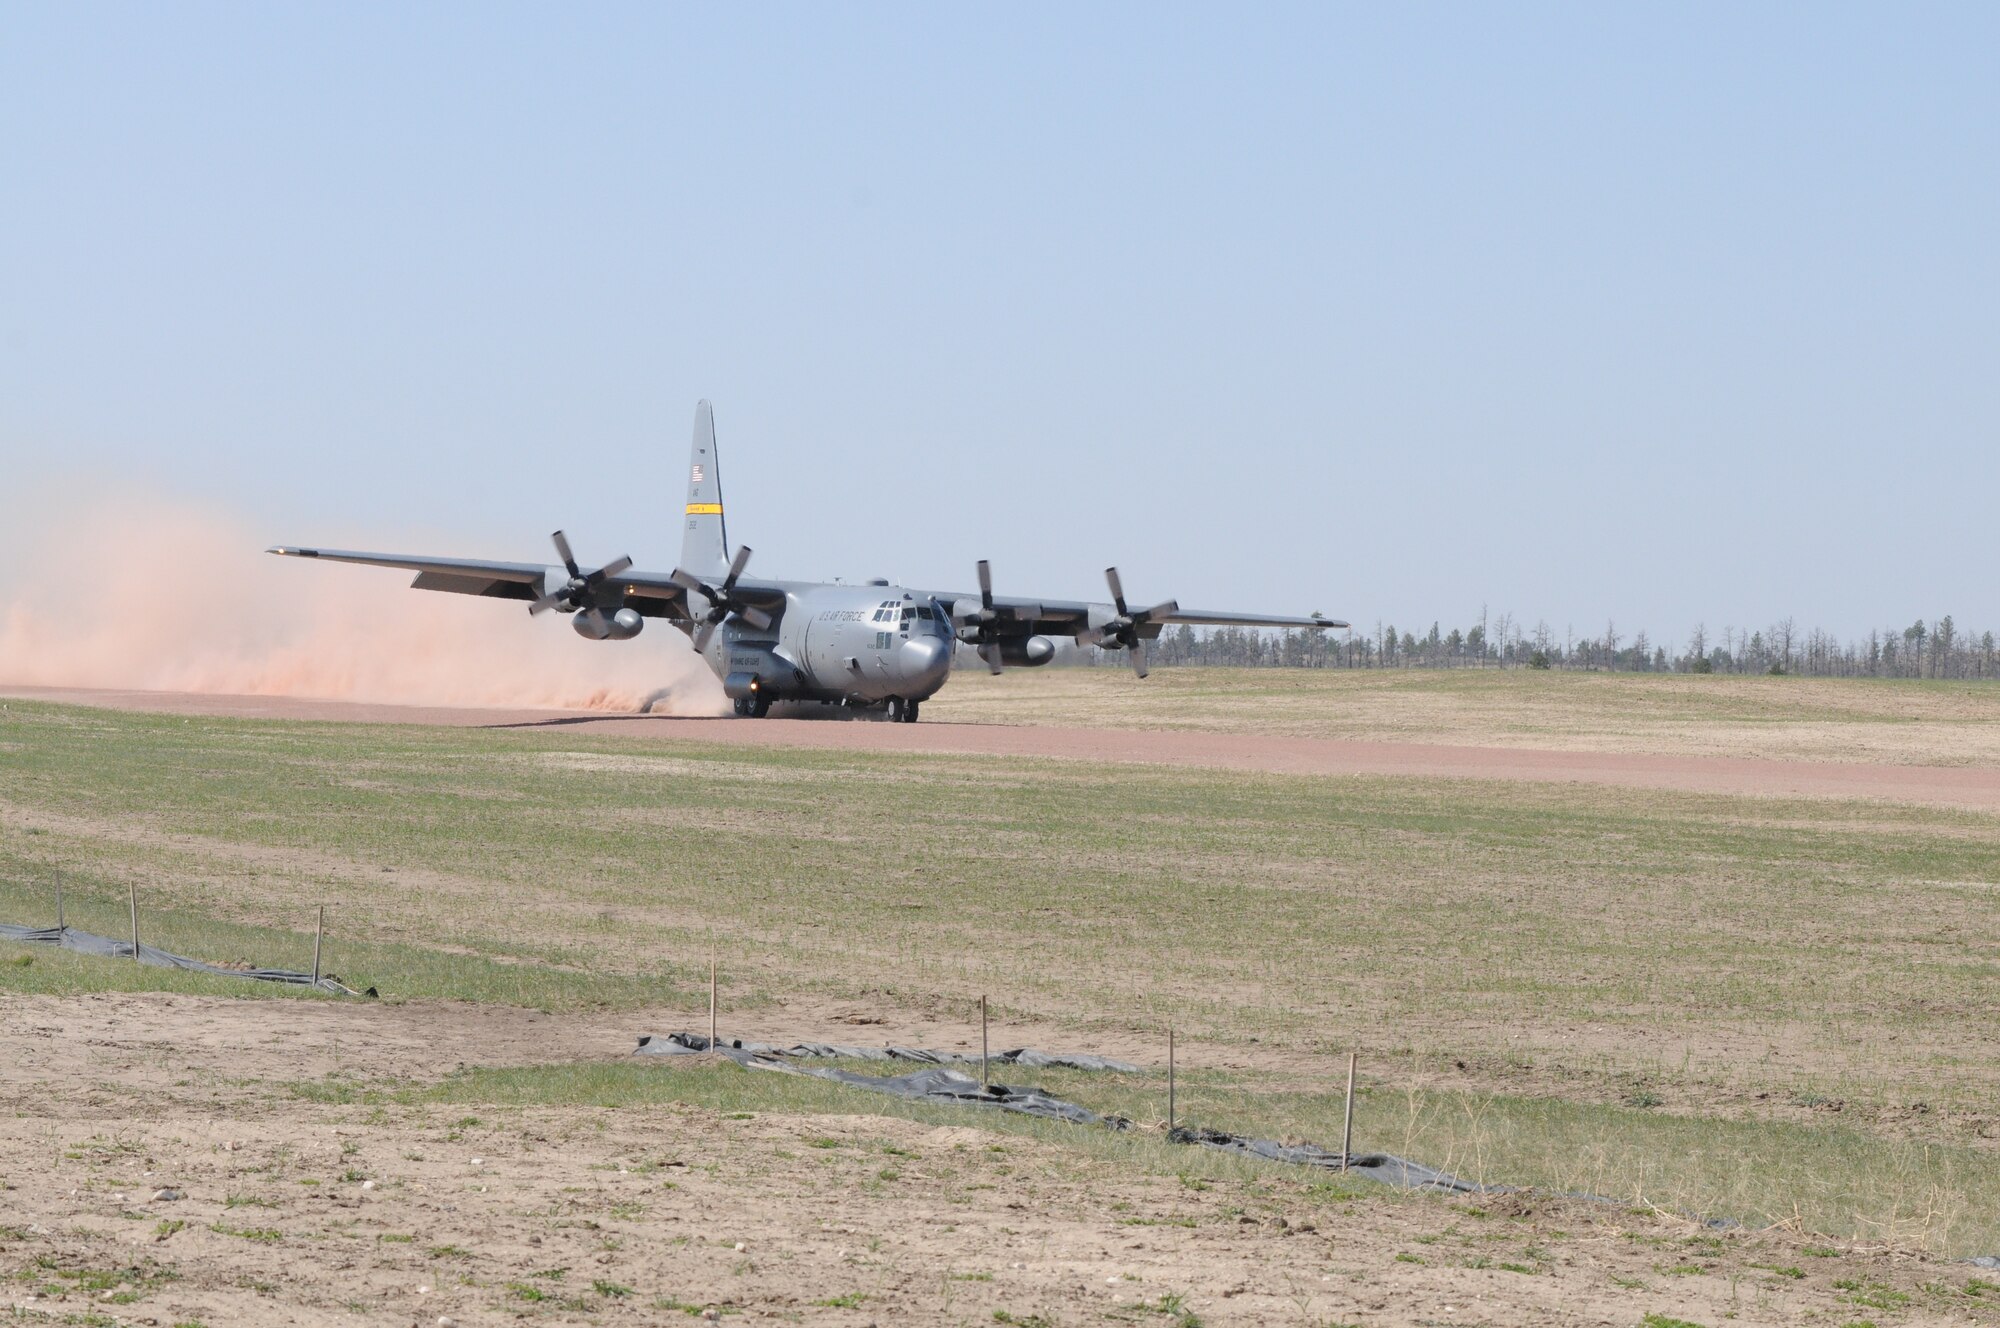 A Wyoming Air National Guard C-130 Hercules, assigned to the 153rd Airlift Wing, becomes the first to test the new Lt. Gen. Wright Tactical Airfield at the Camp Guernsey Joint Training Center's North Training Area, May 15, 2012. The airfield concept for Camp Guernsey was conceived 20 years ago and will provide aircrews real-world tactical training in coordination with ground combat forces. (Photo by Dewey Baars)